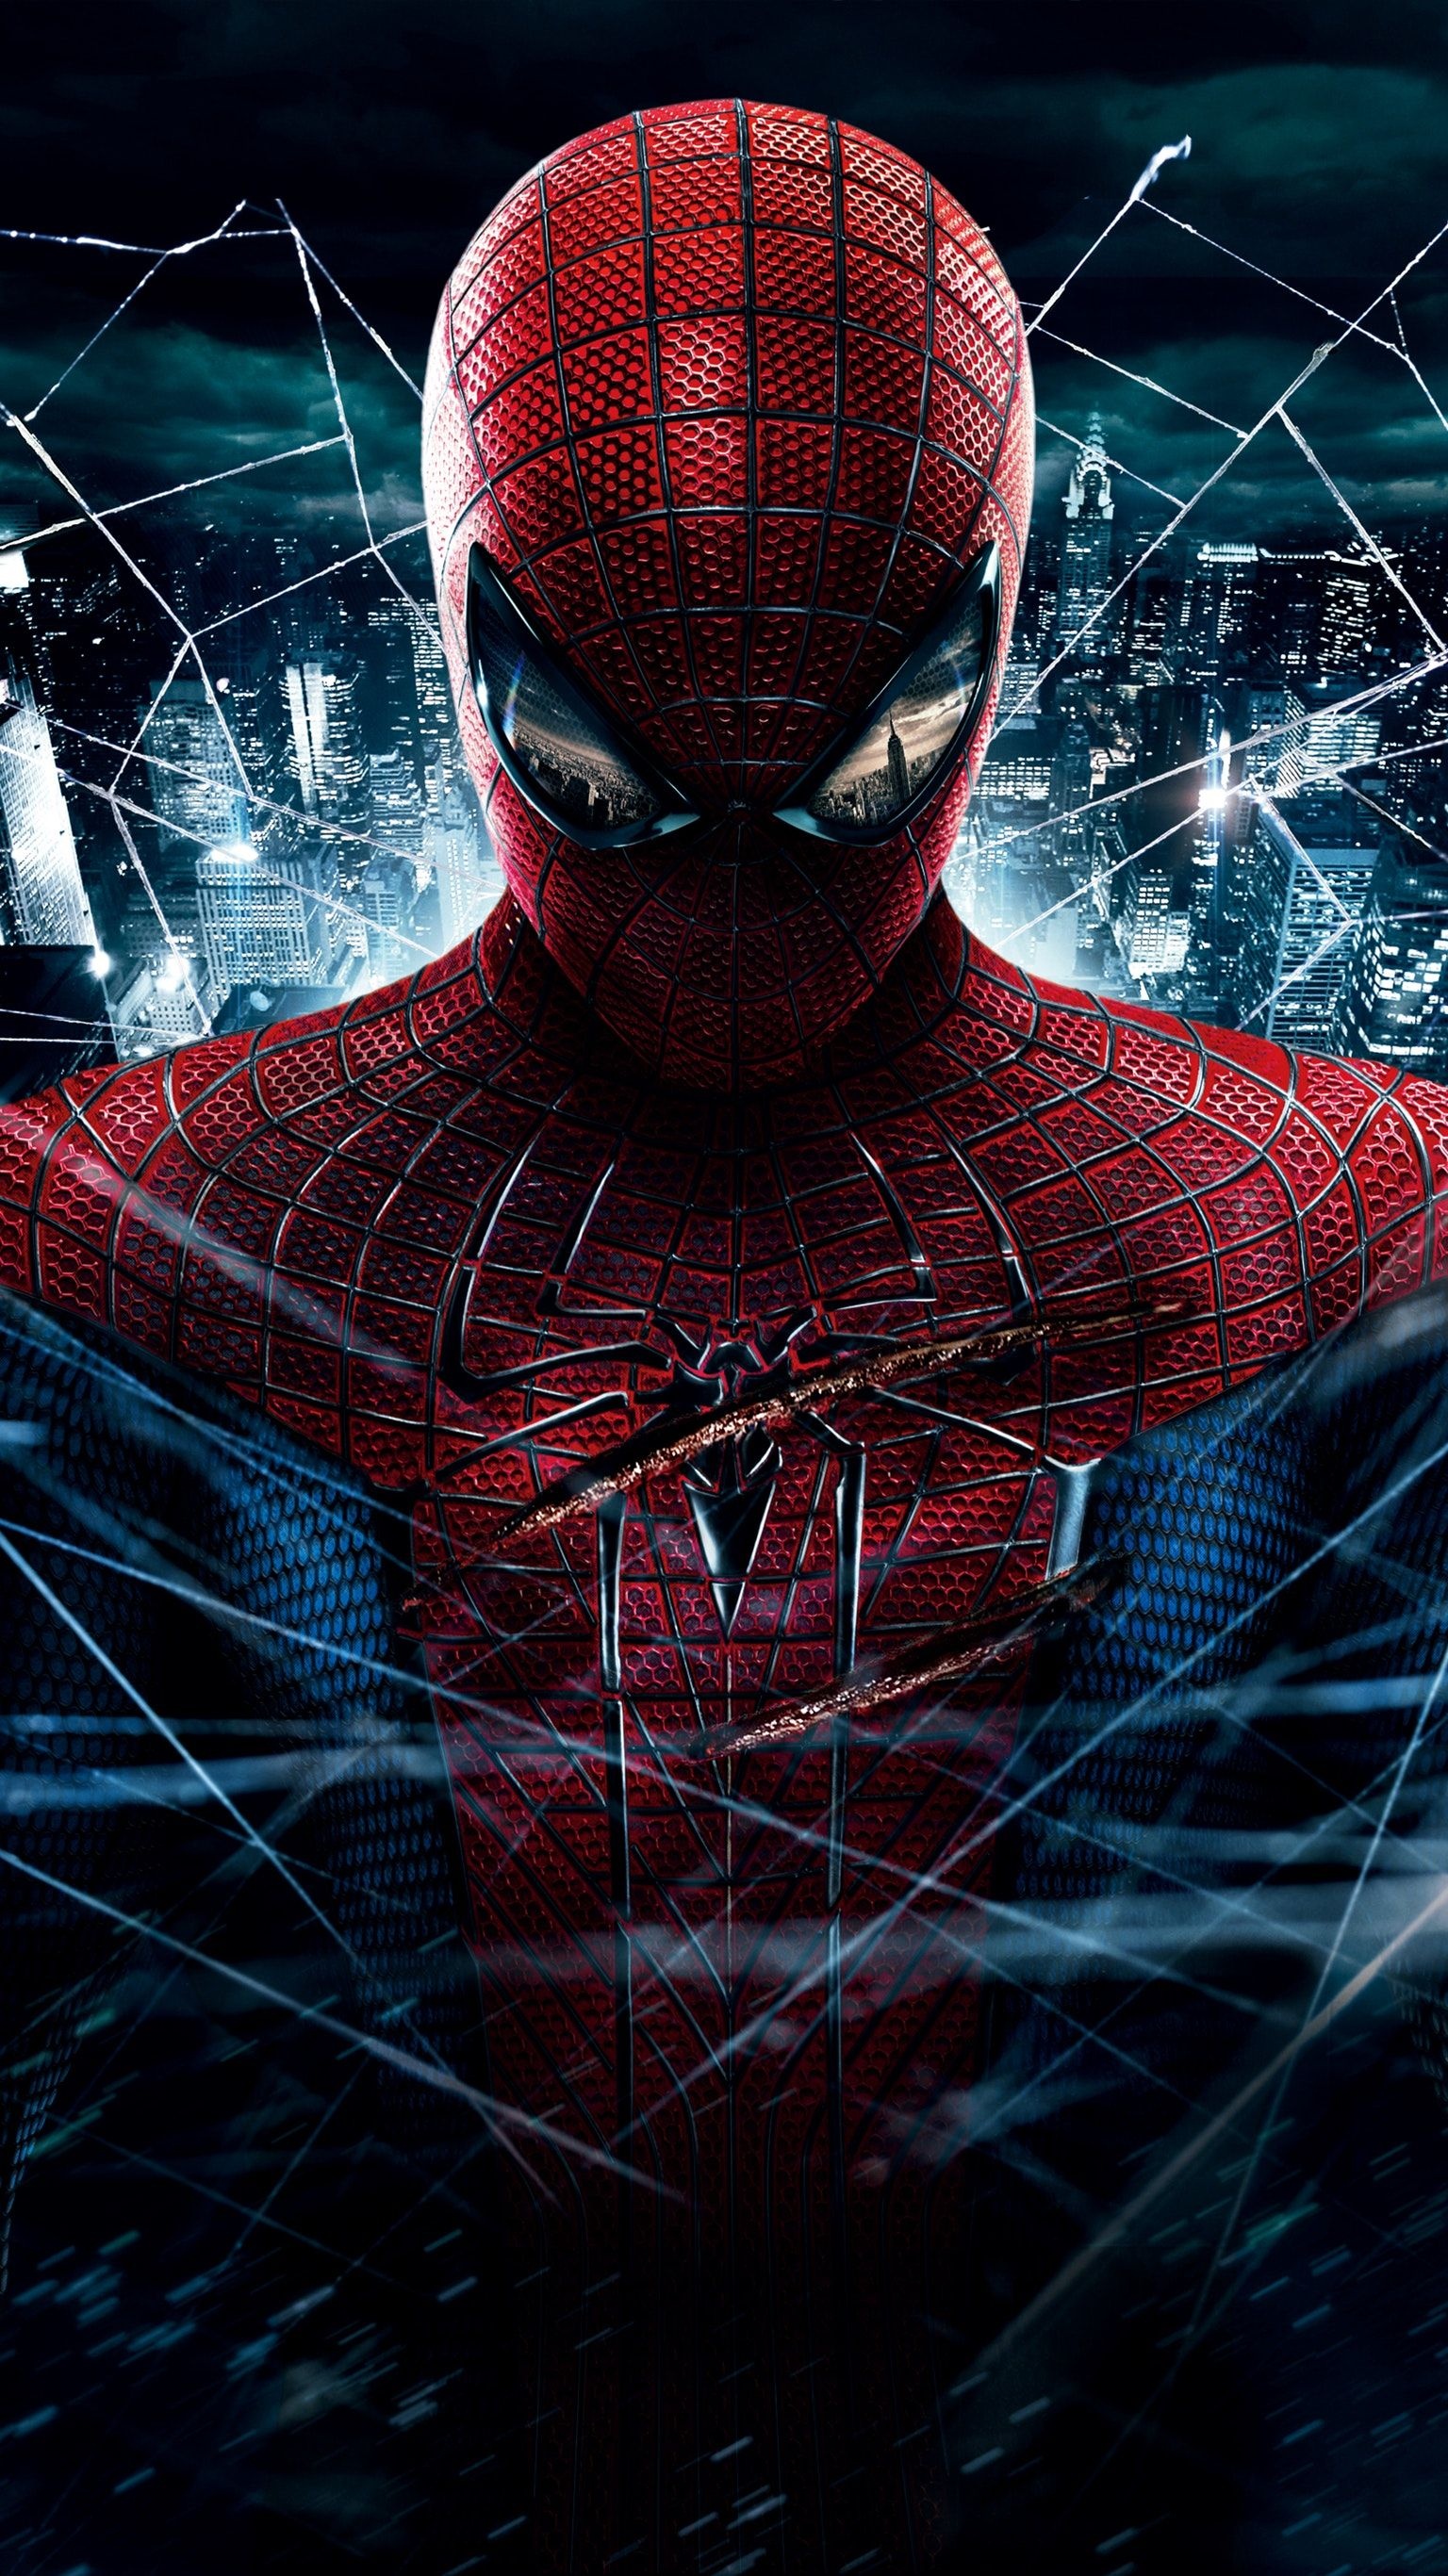 The Amazing Spider-Man, Phone wallpaper, Action-packed movie, Marvel superhero, 1540x2740 HD Handy